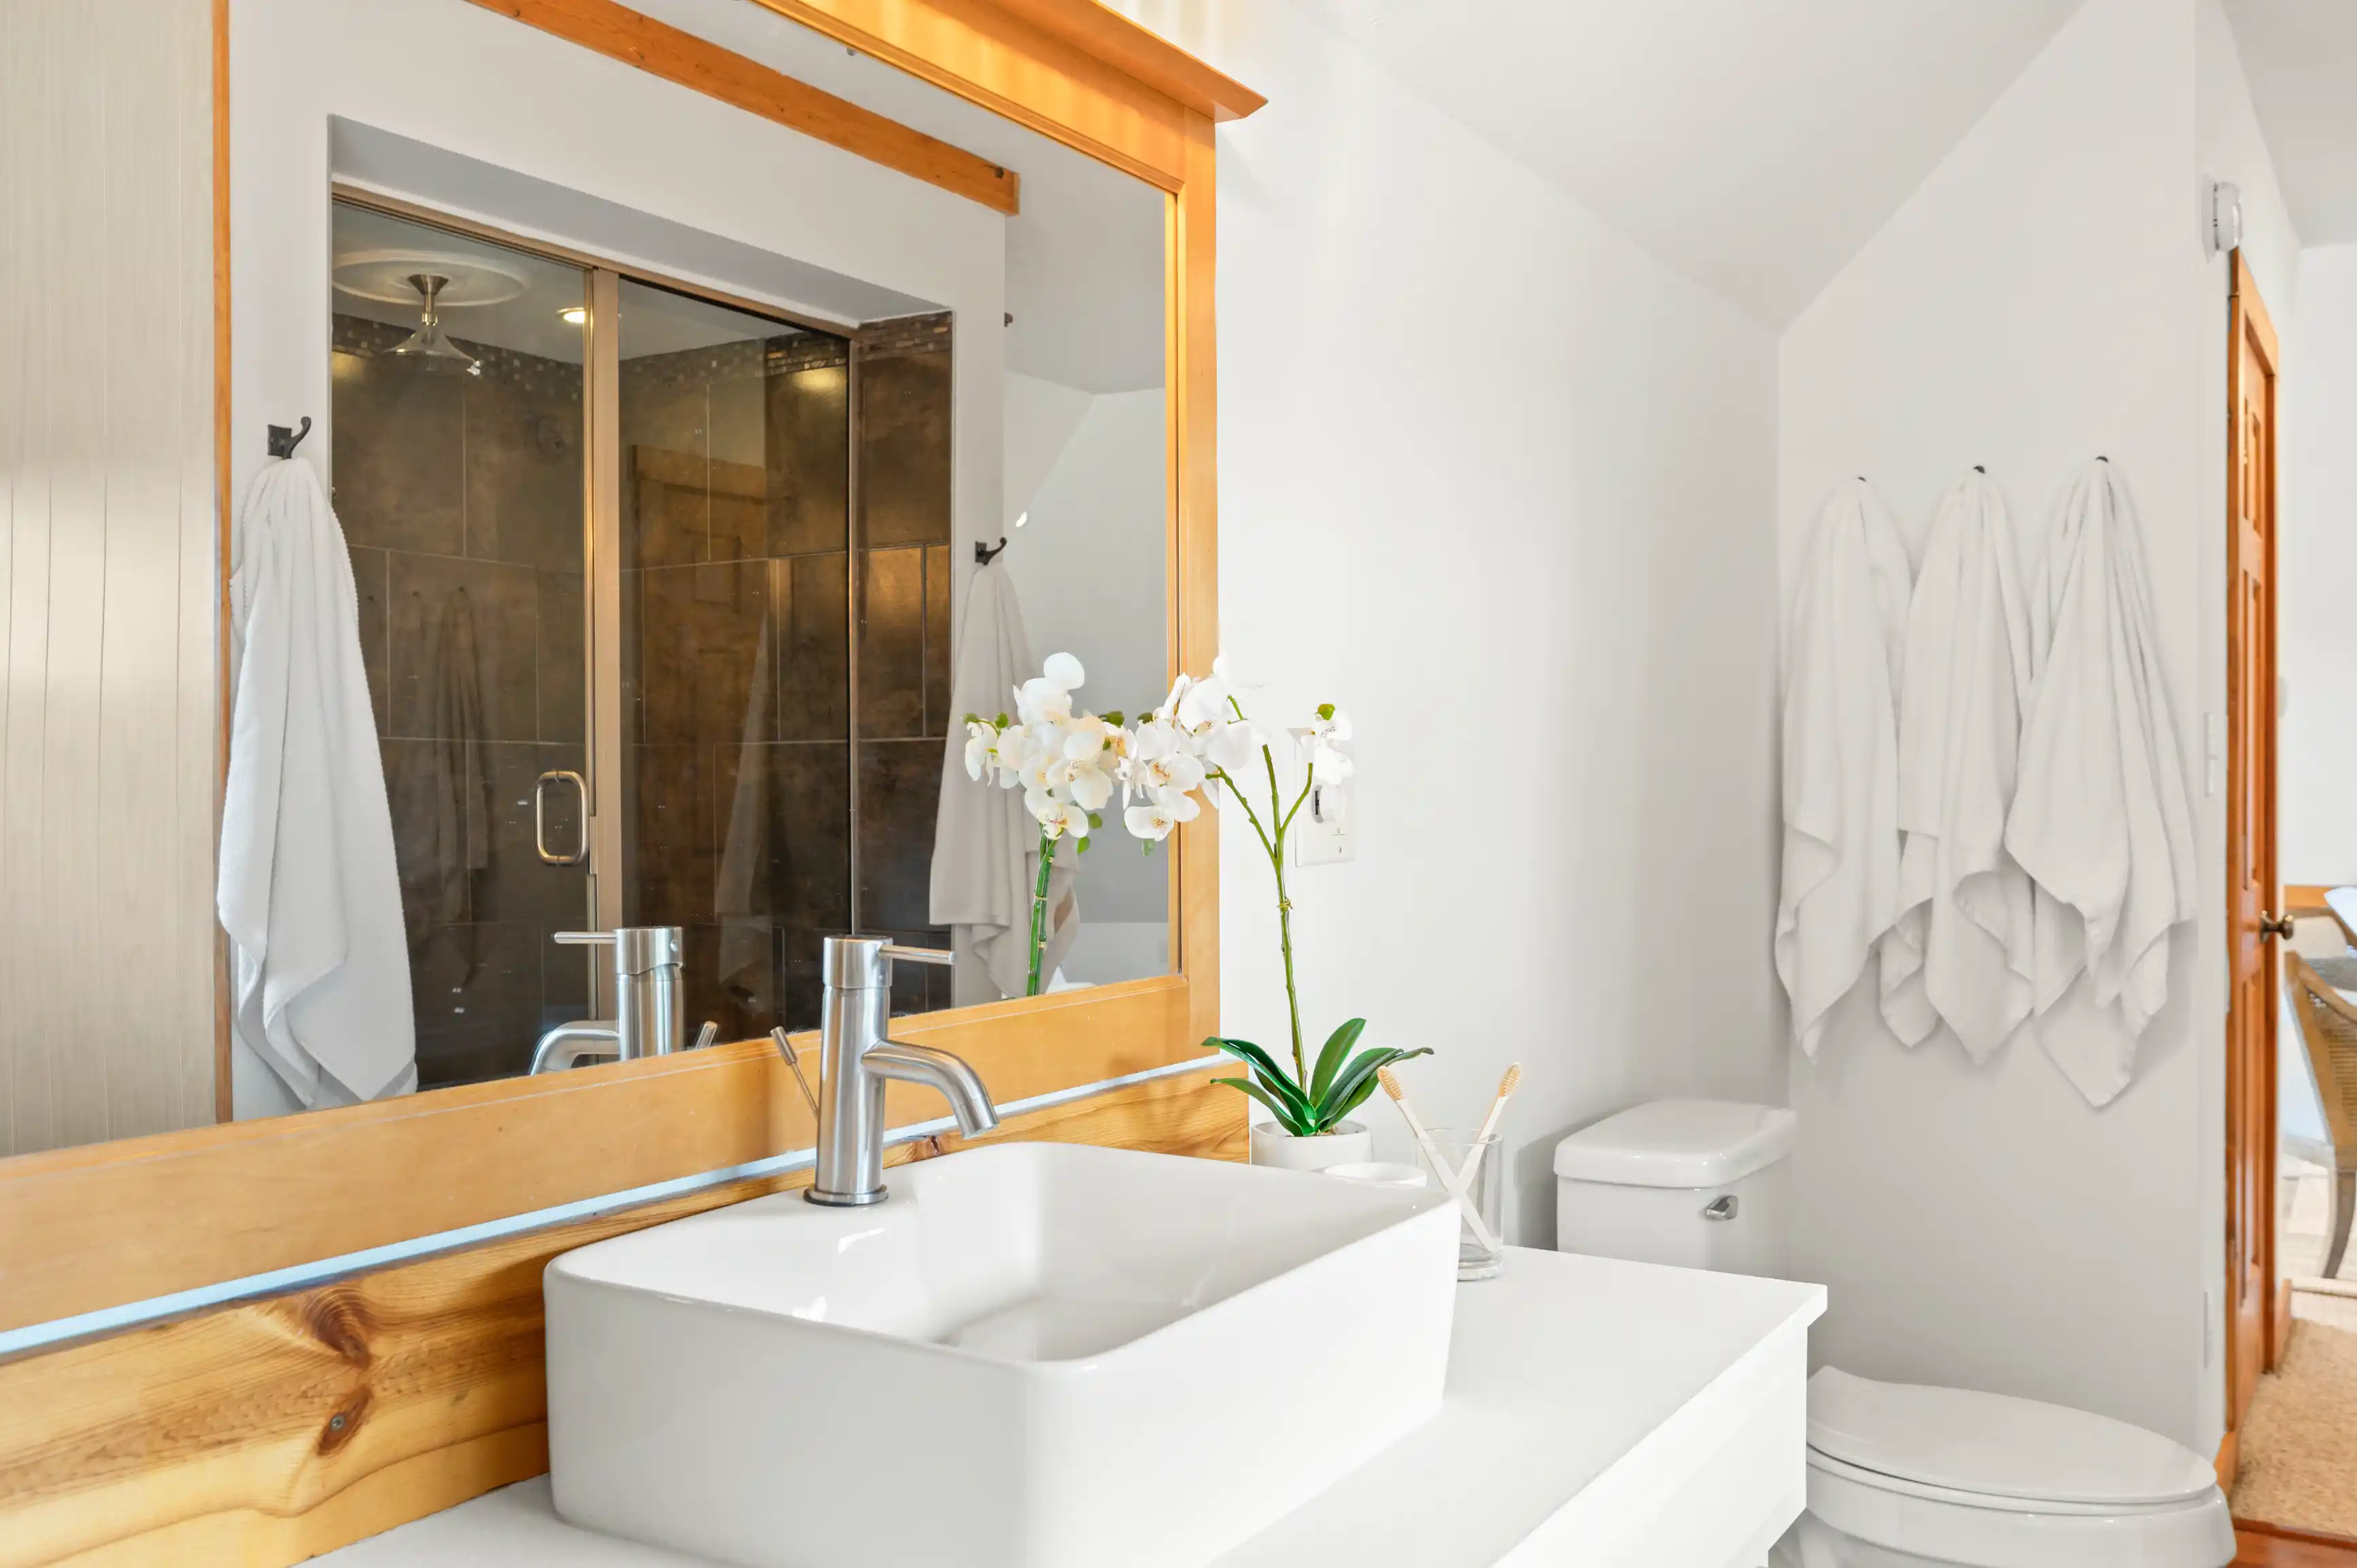 Bright modern bathroom interior with wooden countertop, rectangular vessel sink, orchid plant, shower stall with glass doors, and white towels hanging on wall hooks.